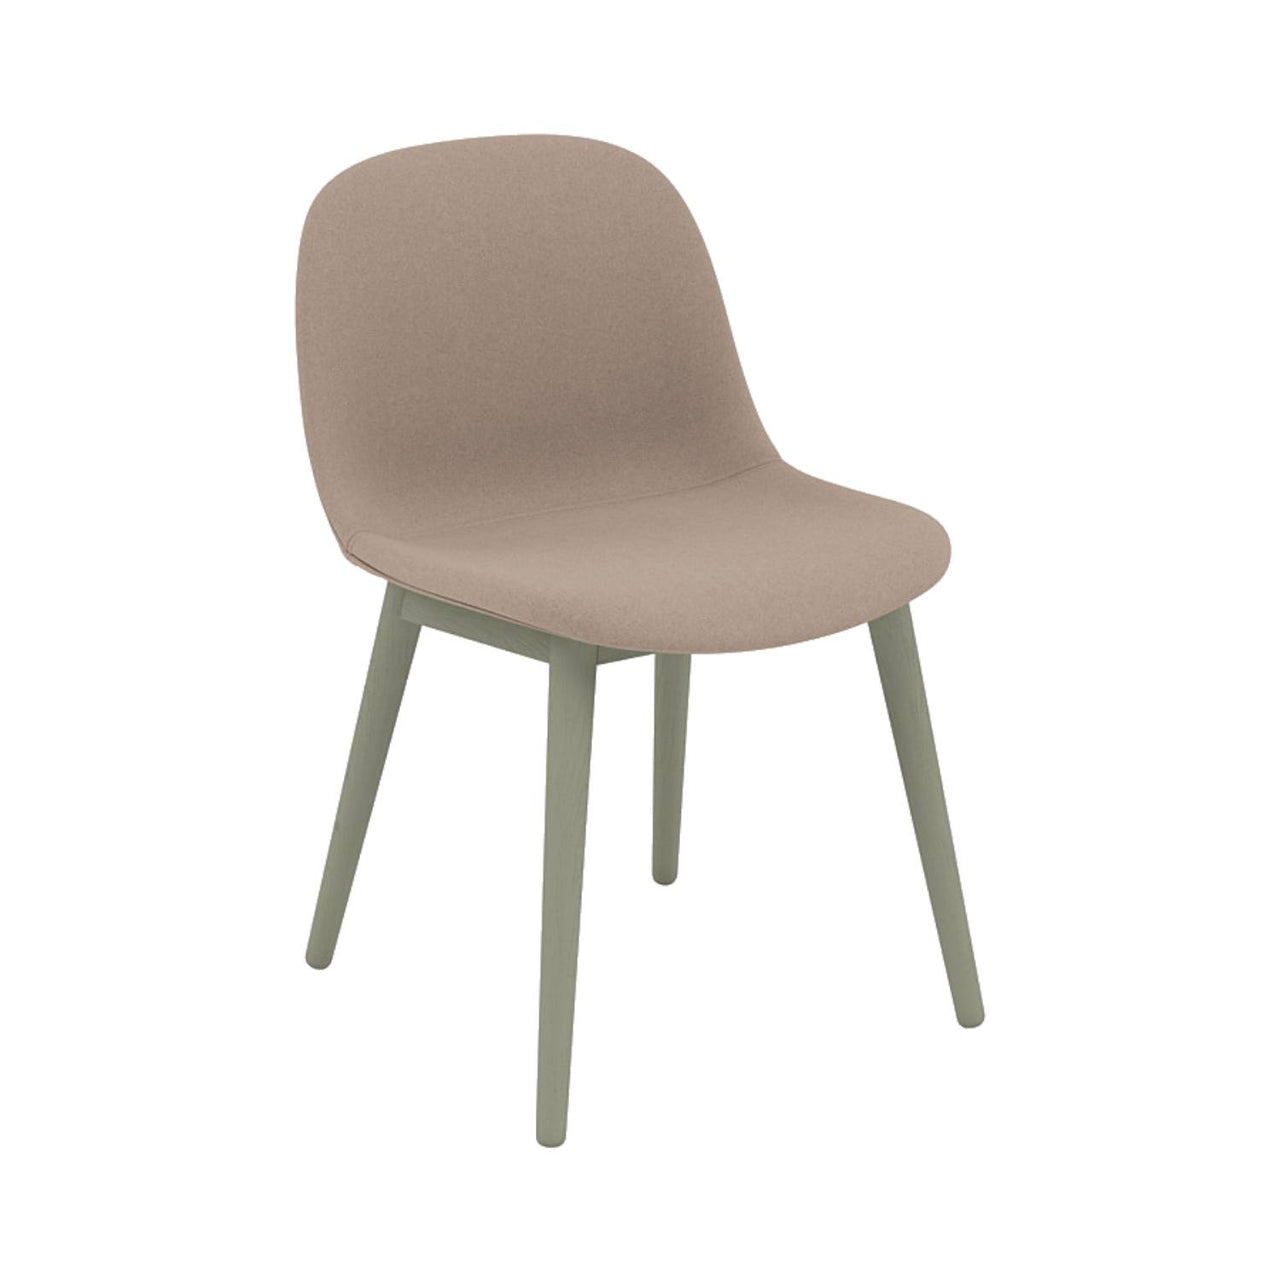 Fiber Side Chair: Wood Base + Recycled Shell + Upholstered +  Dusty Green